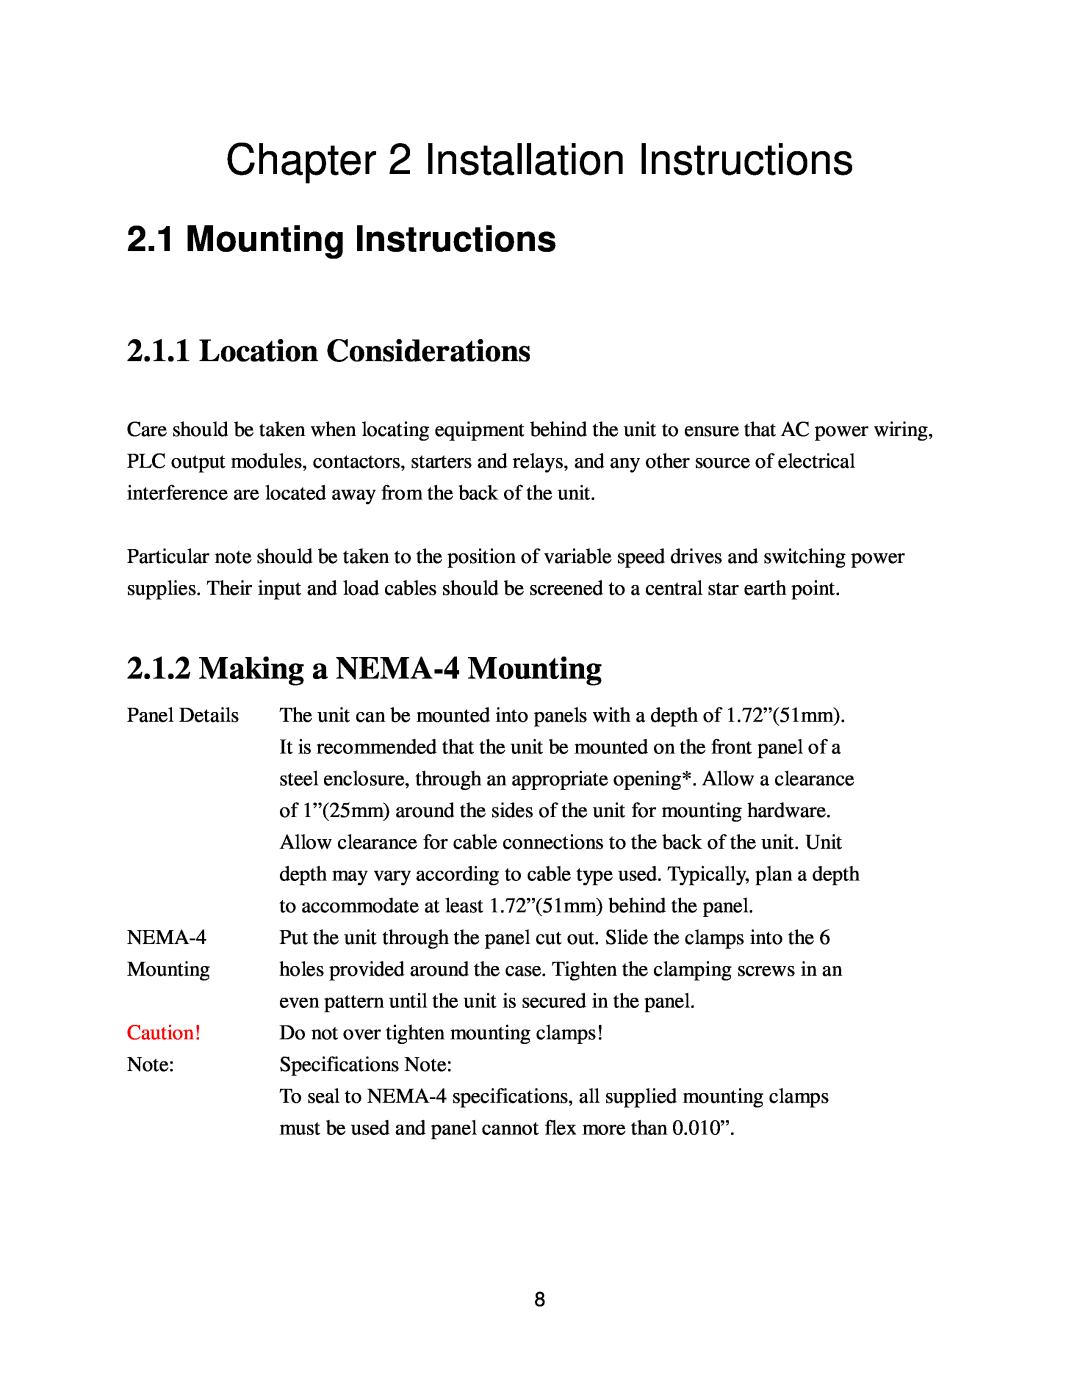 Nextar NP-610X Installation Instructions, Mounting Instructions, Location Considerations, Making a NEMA-4 Mounting 